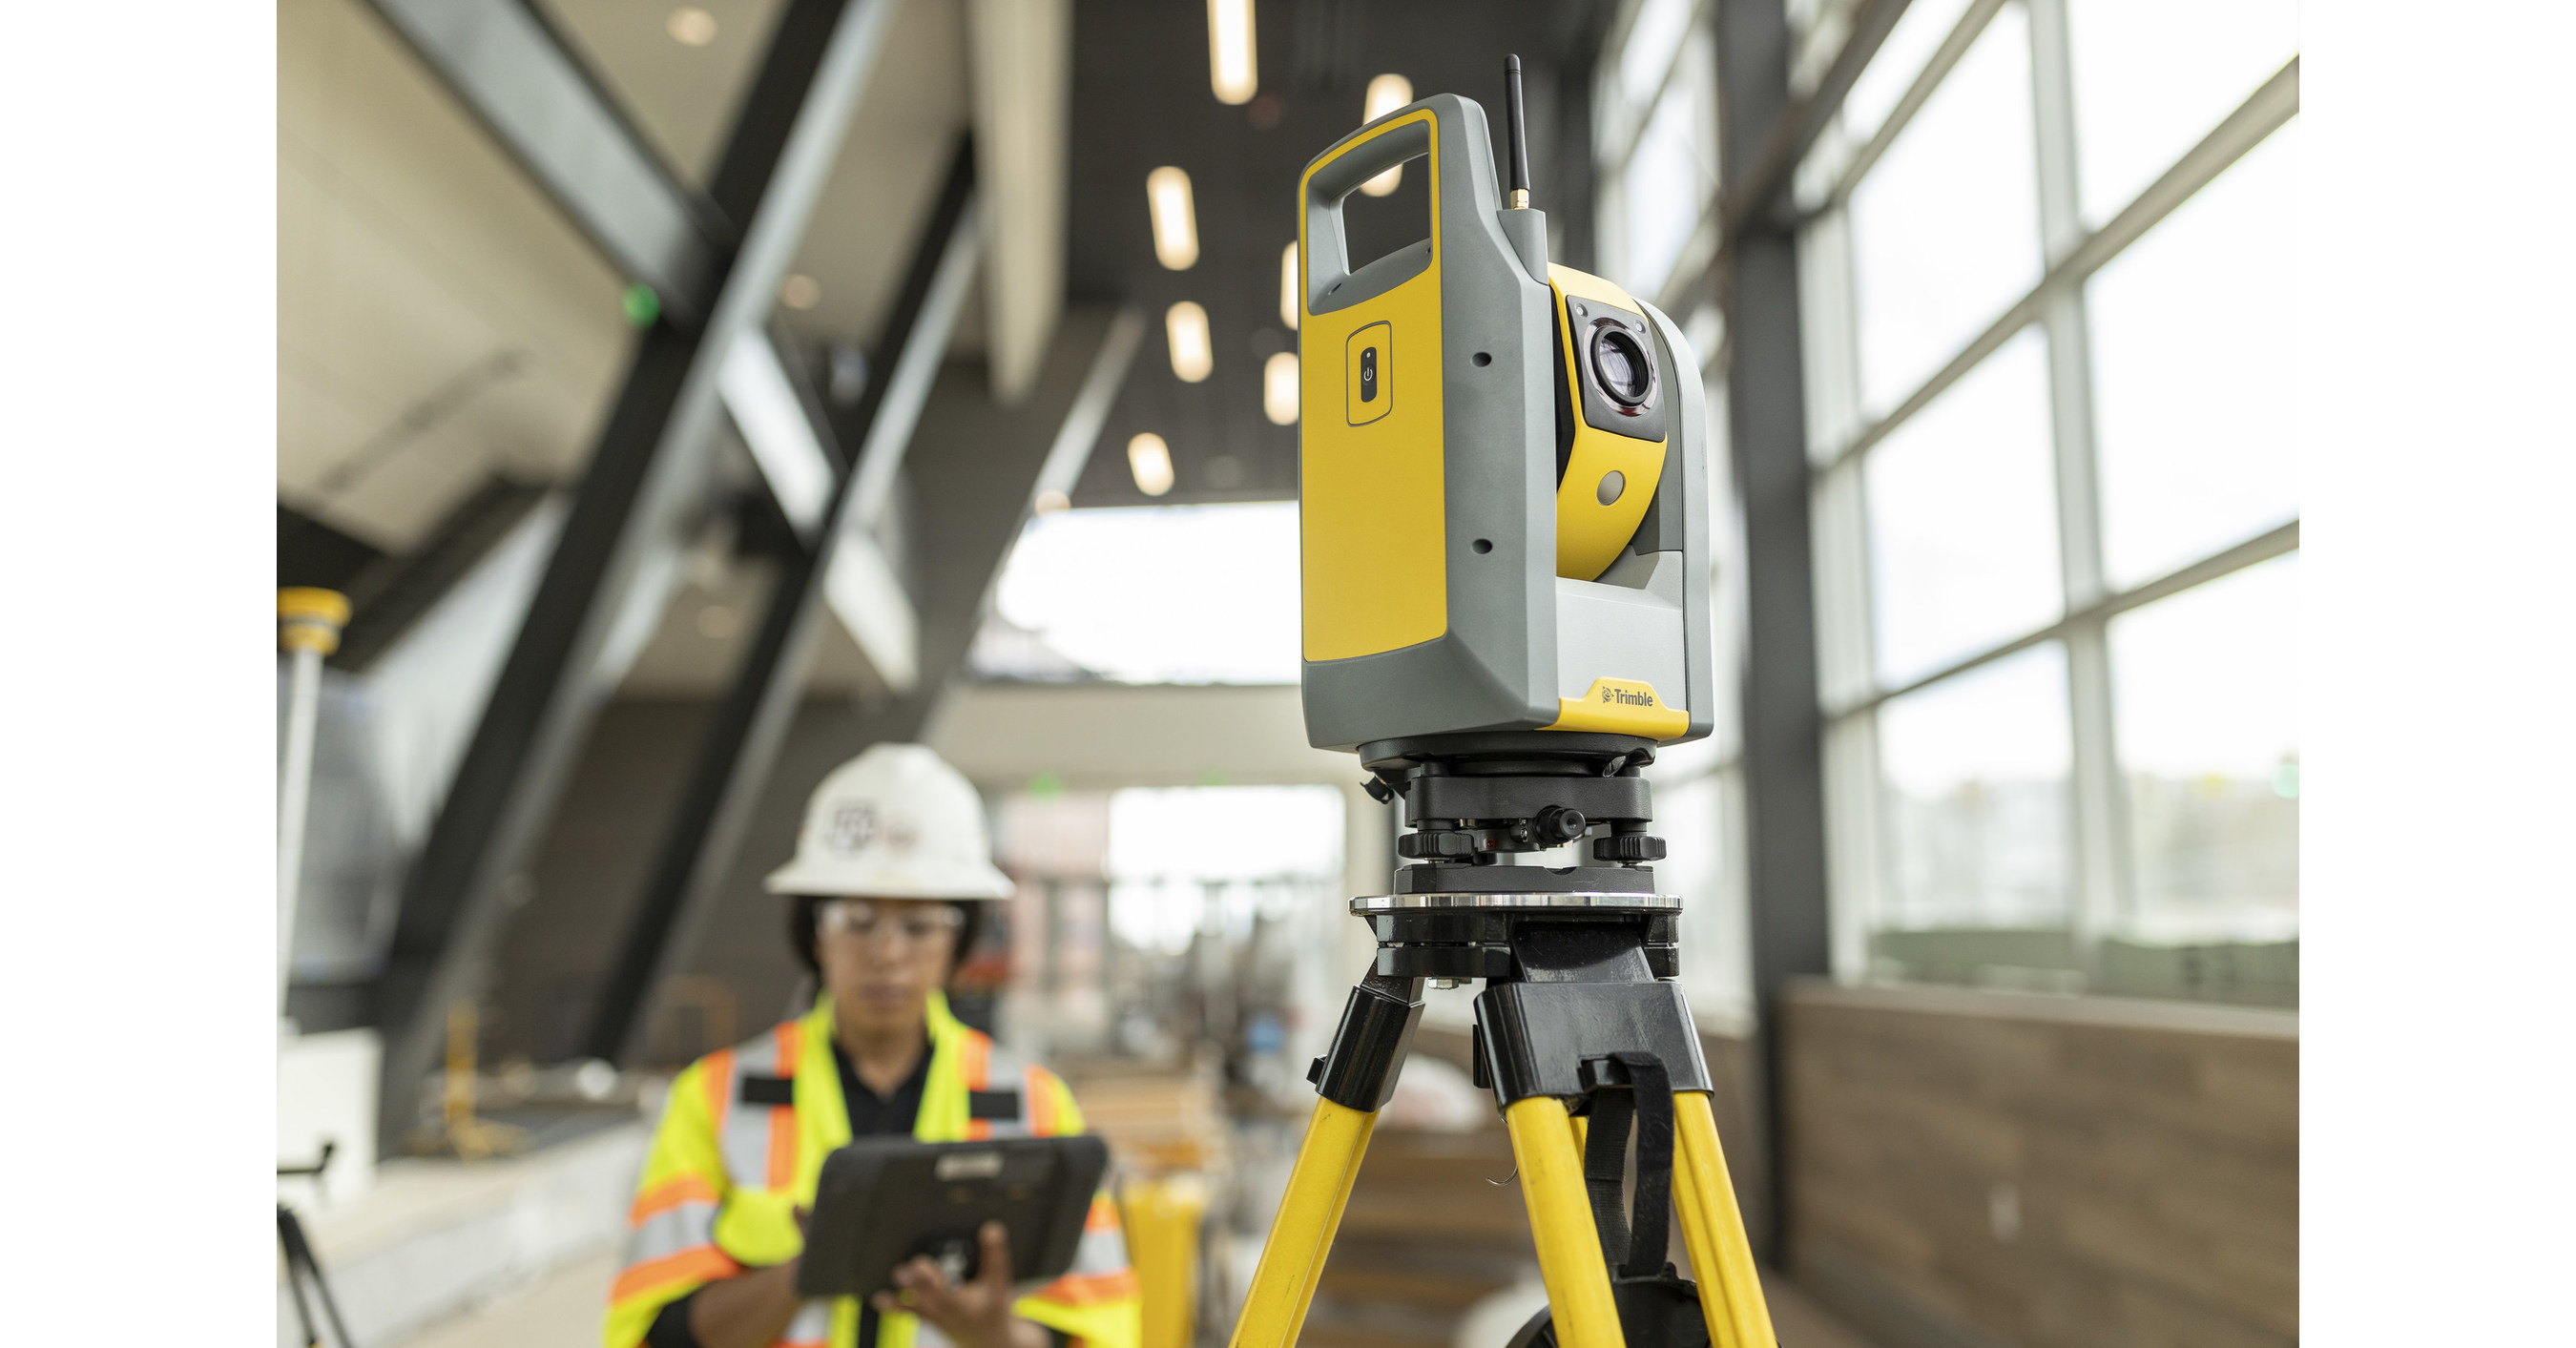 Trimble Sets New Standard for Robotic Total Station Scalability